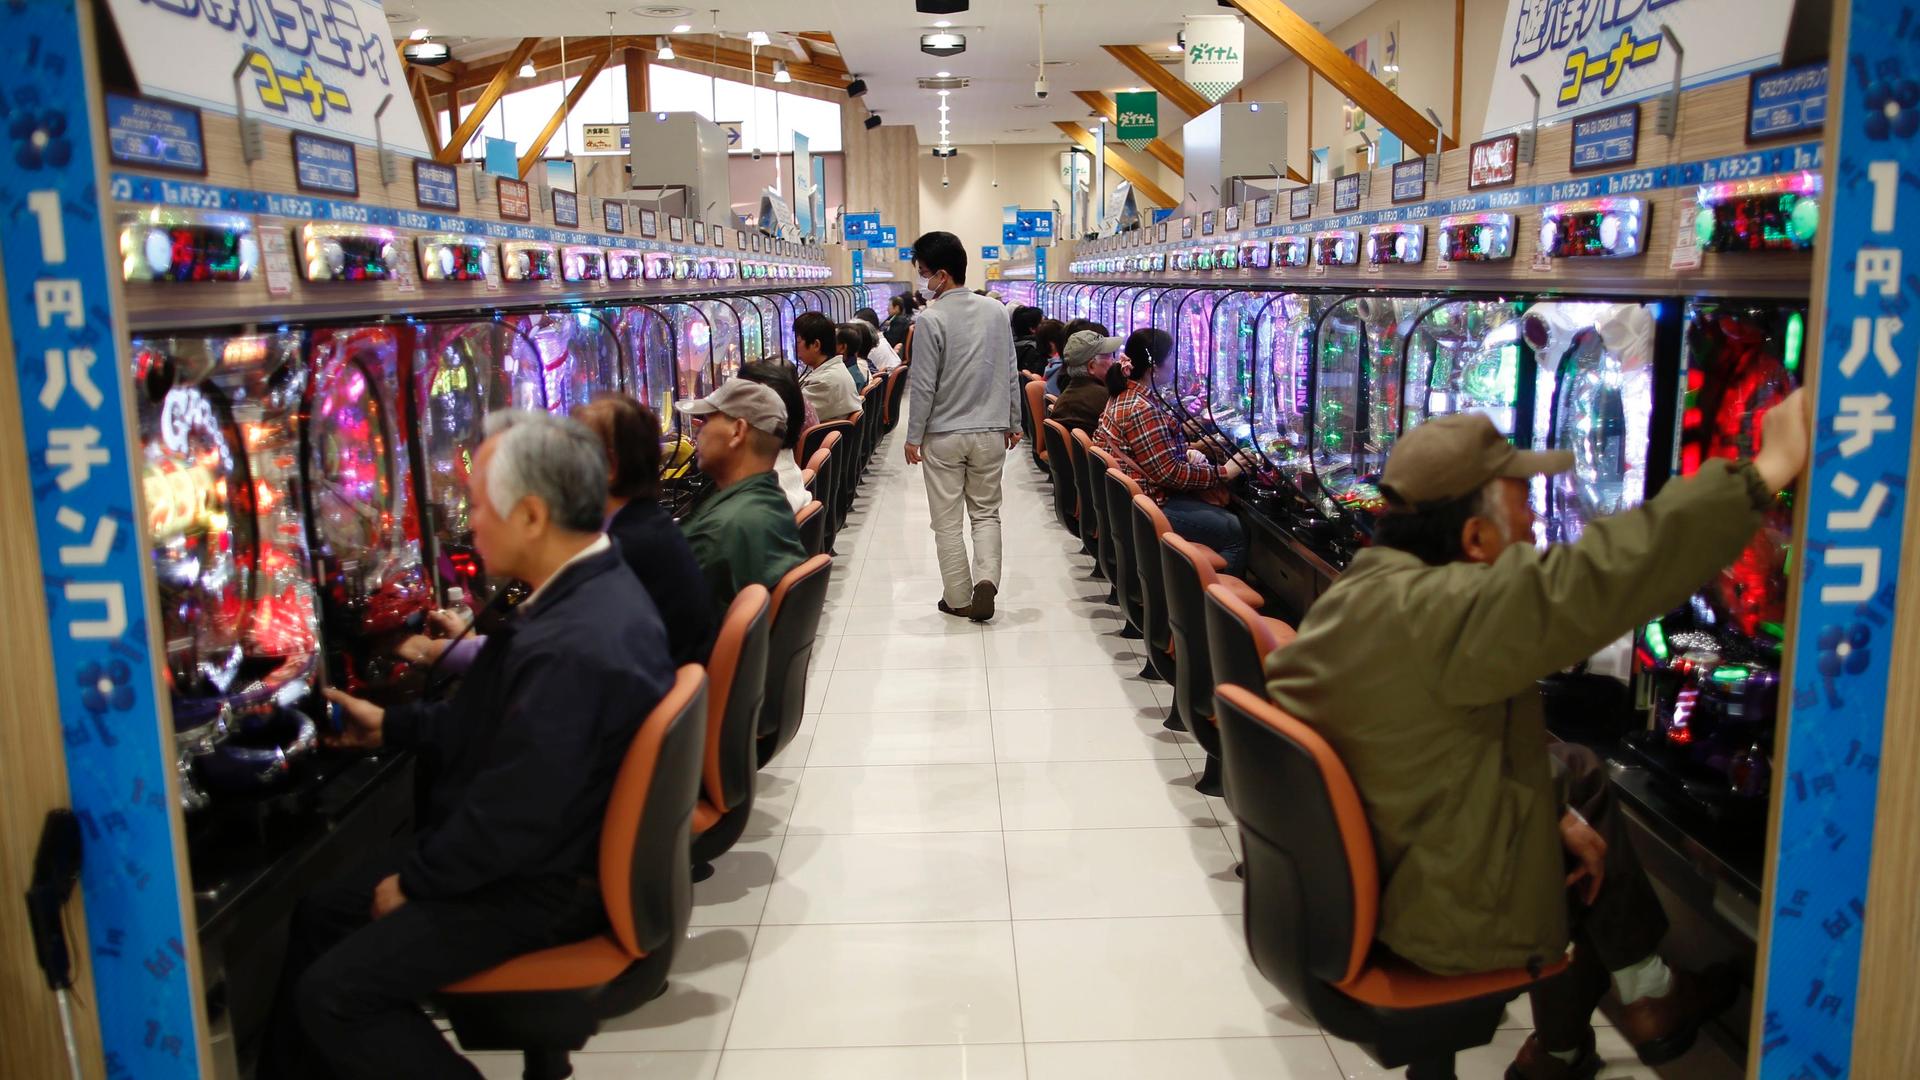 Visitors play Pachinko, a Japanese form of legal gambling, at Dynam Japan Holdings Co.'s Pachinko parlour in Koga, north of Tokyo, April 7, 2014. 